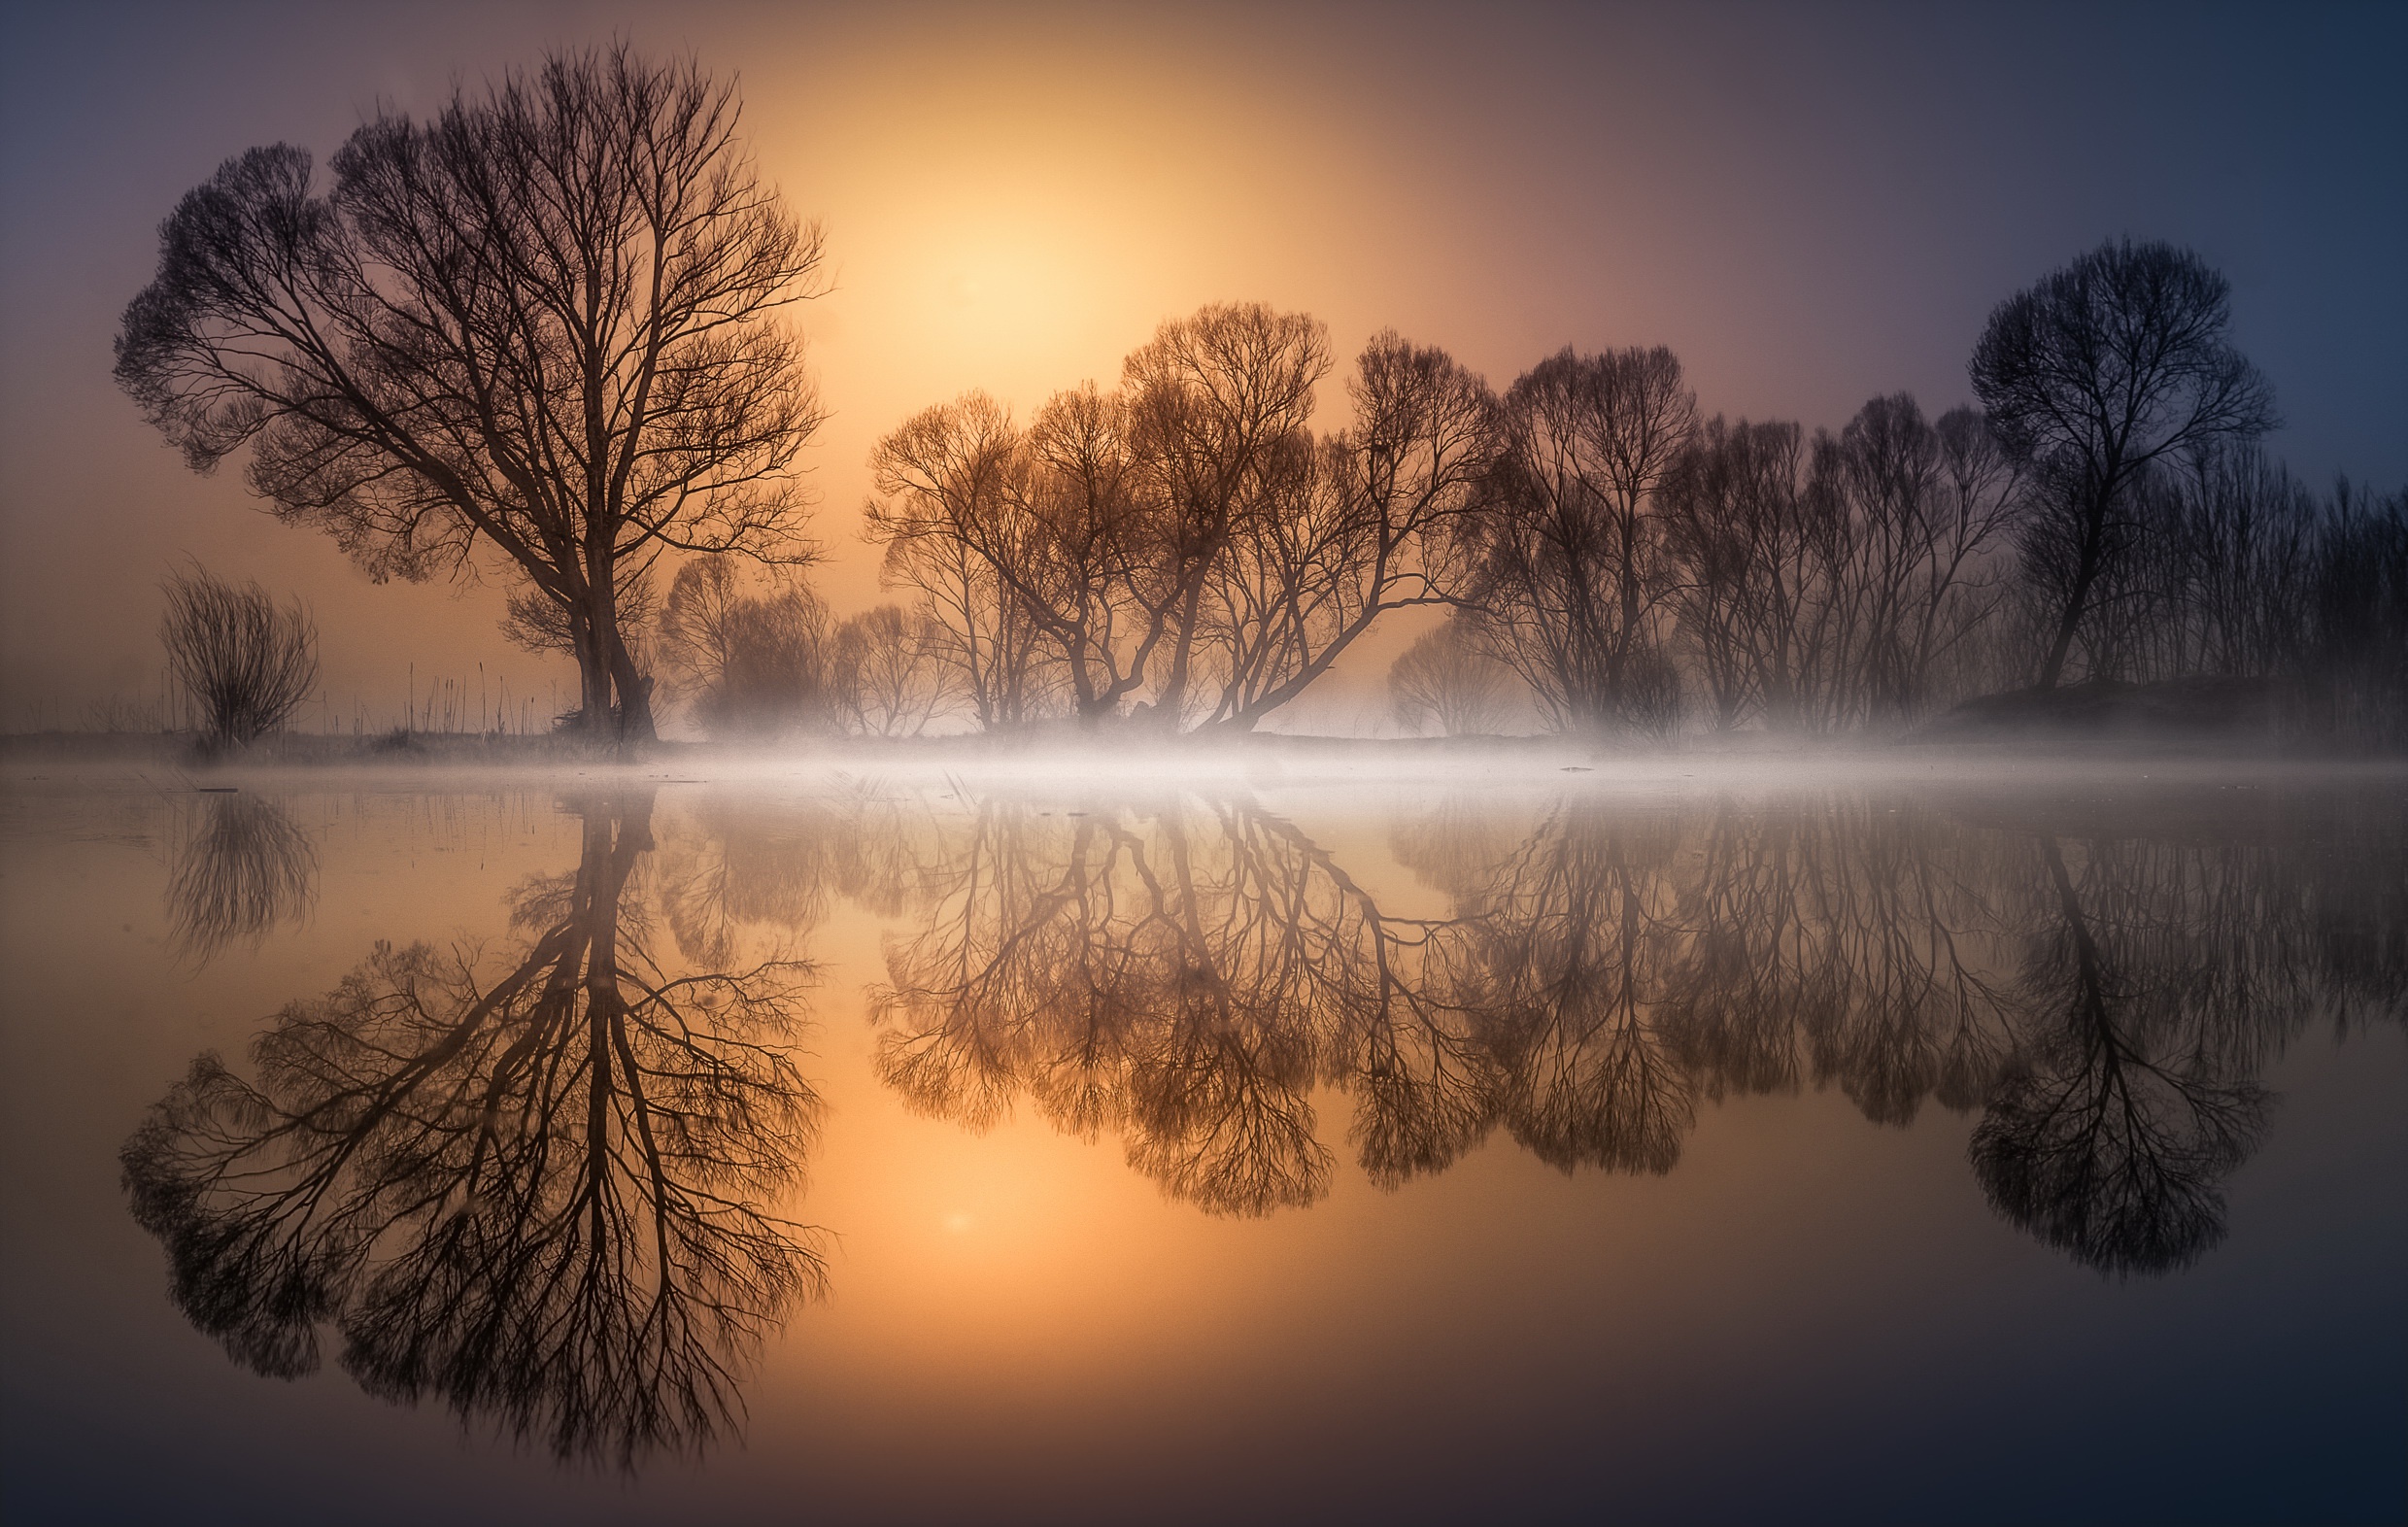 General 2479x1572 nature mist trees sunlight water reflection